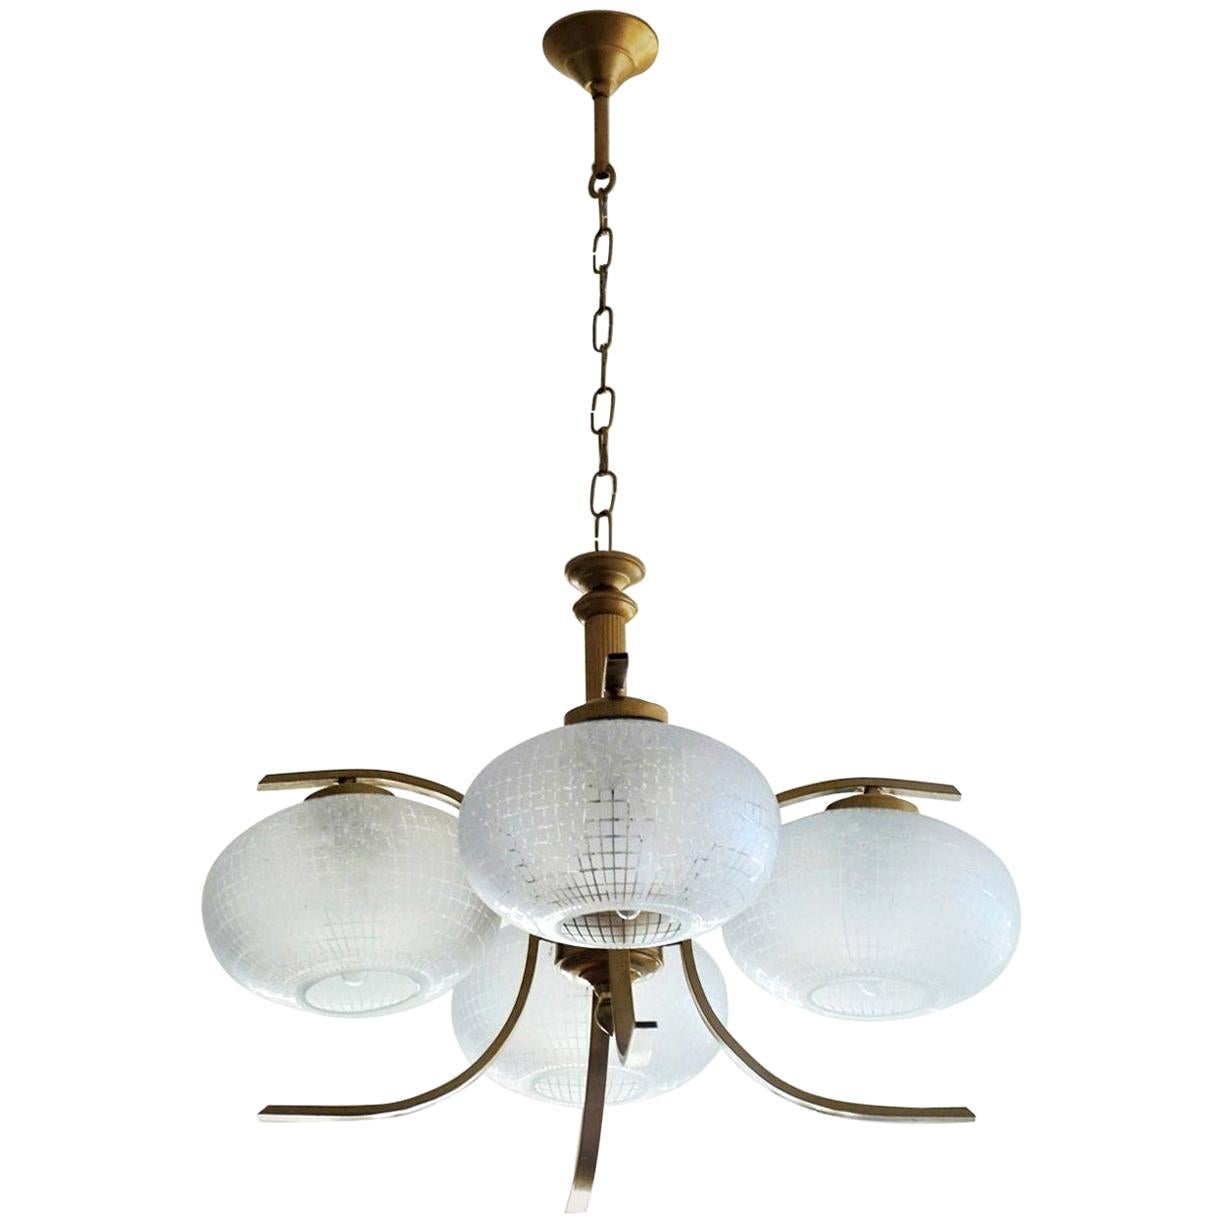 Space Age brass four-light chandelier with large frosted glass globes, Italy, 1960s
Measures:
Overall height 30